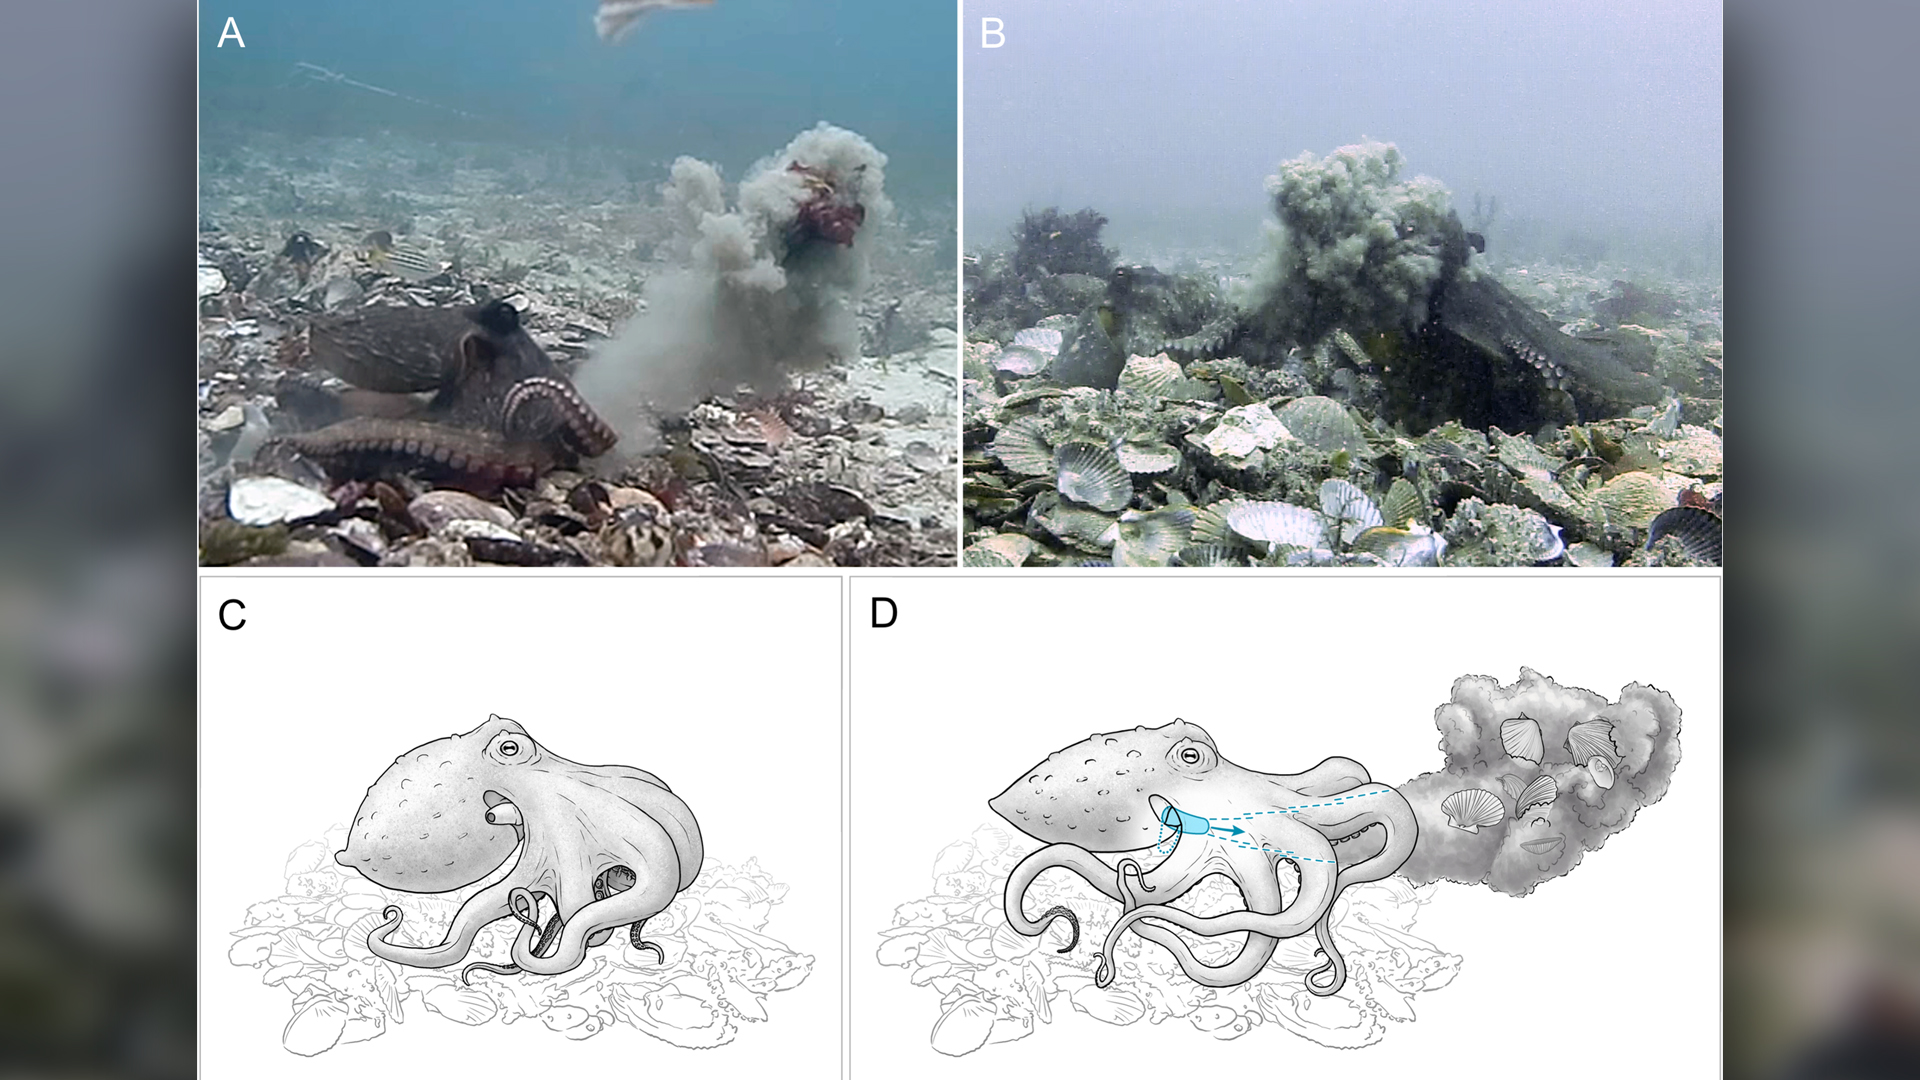 Debris shedding by Octopus tetricus in the wild.  (A) Octopus (left) expels mud and kelp through the water.  (B) An octopus (right) is hit by a cloud of silt thrown up by an octopus darting through the water;  (c) shells, silt, algae or any mixture are stored in the disposal wings;  (D) The siphon is lowered over the rear wing and under the web and crown of the wing, and the water is forced out through the siphon.